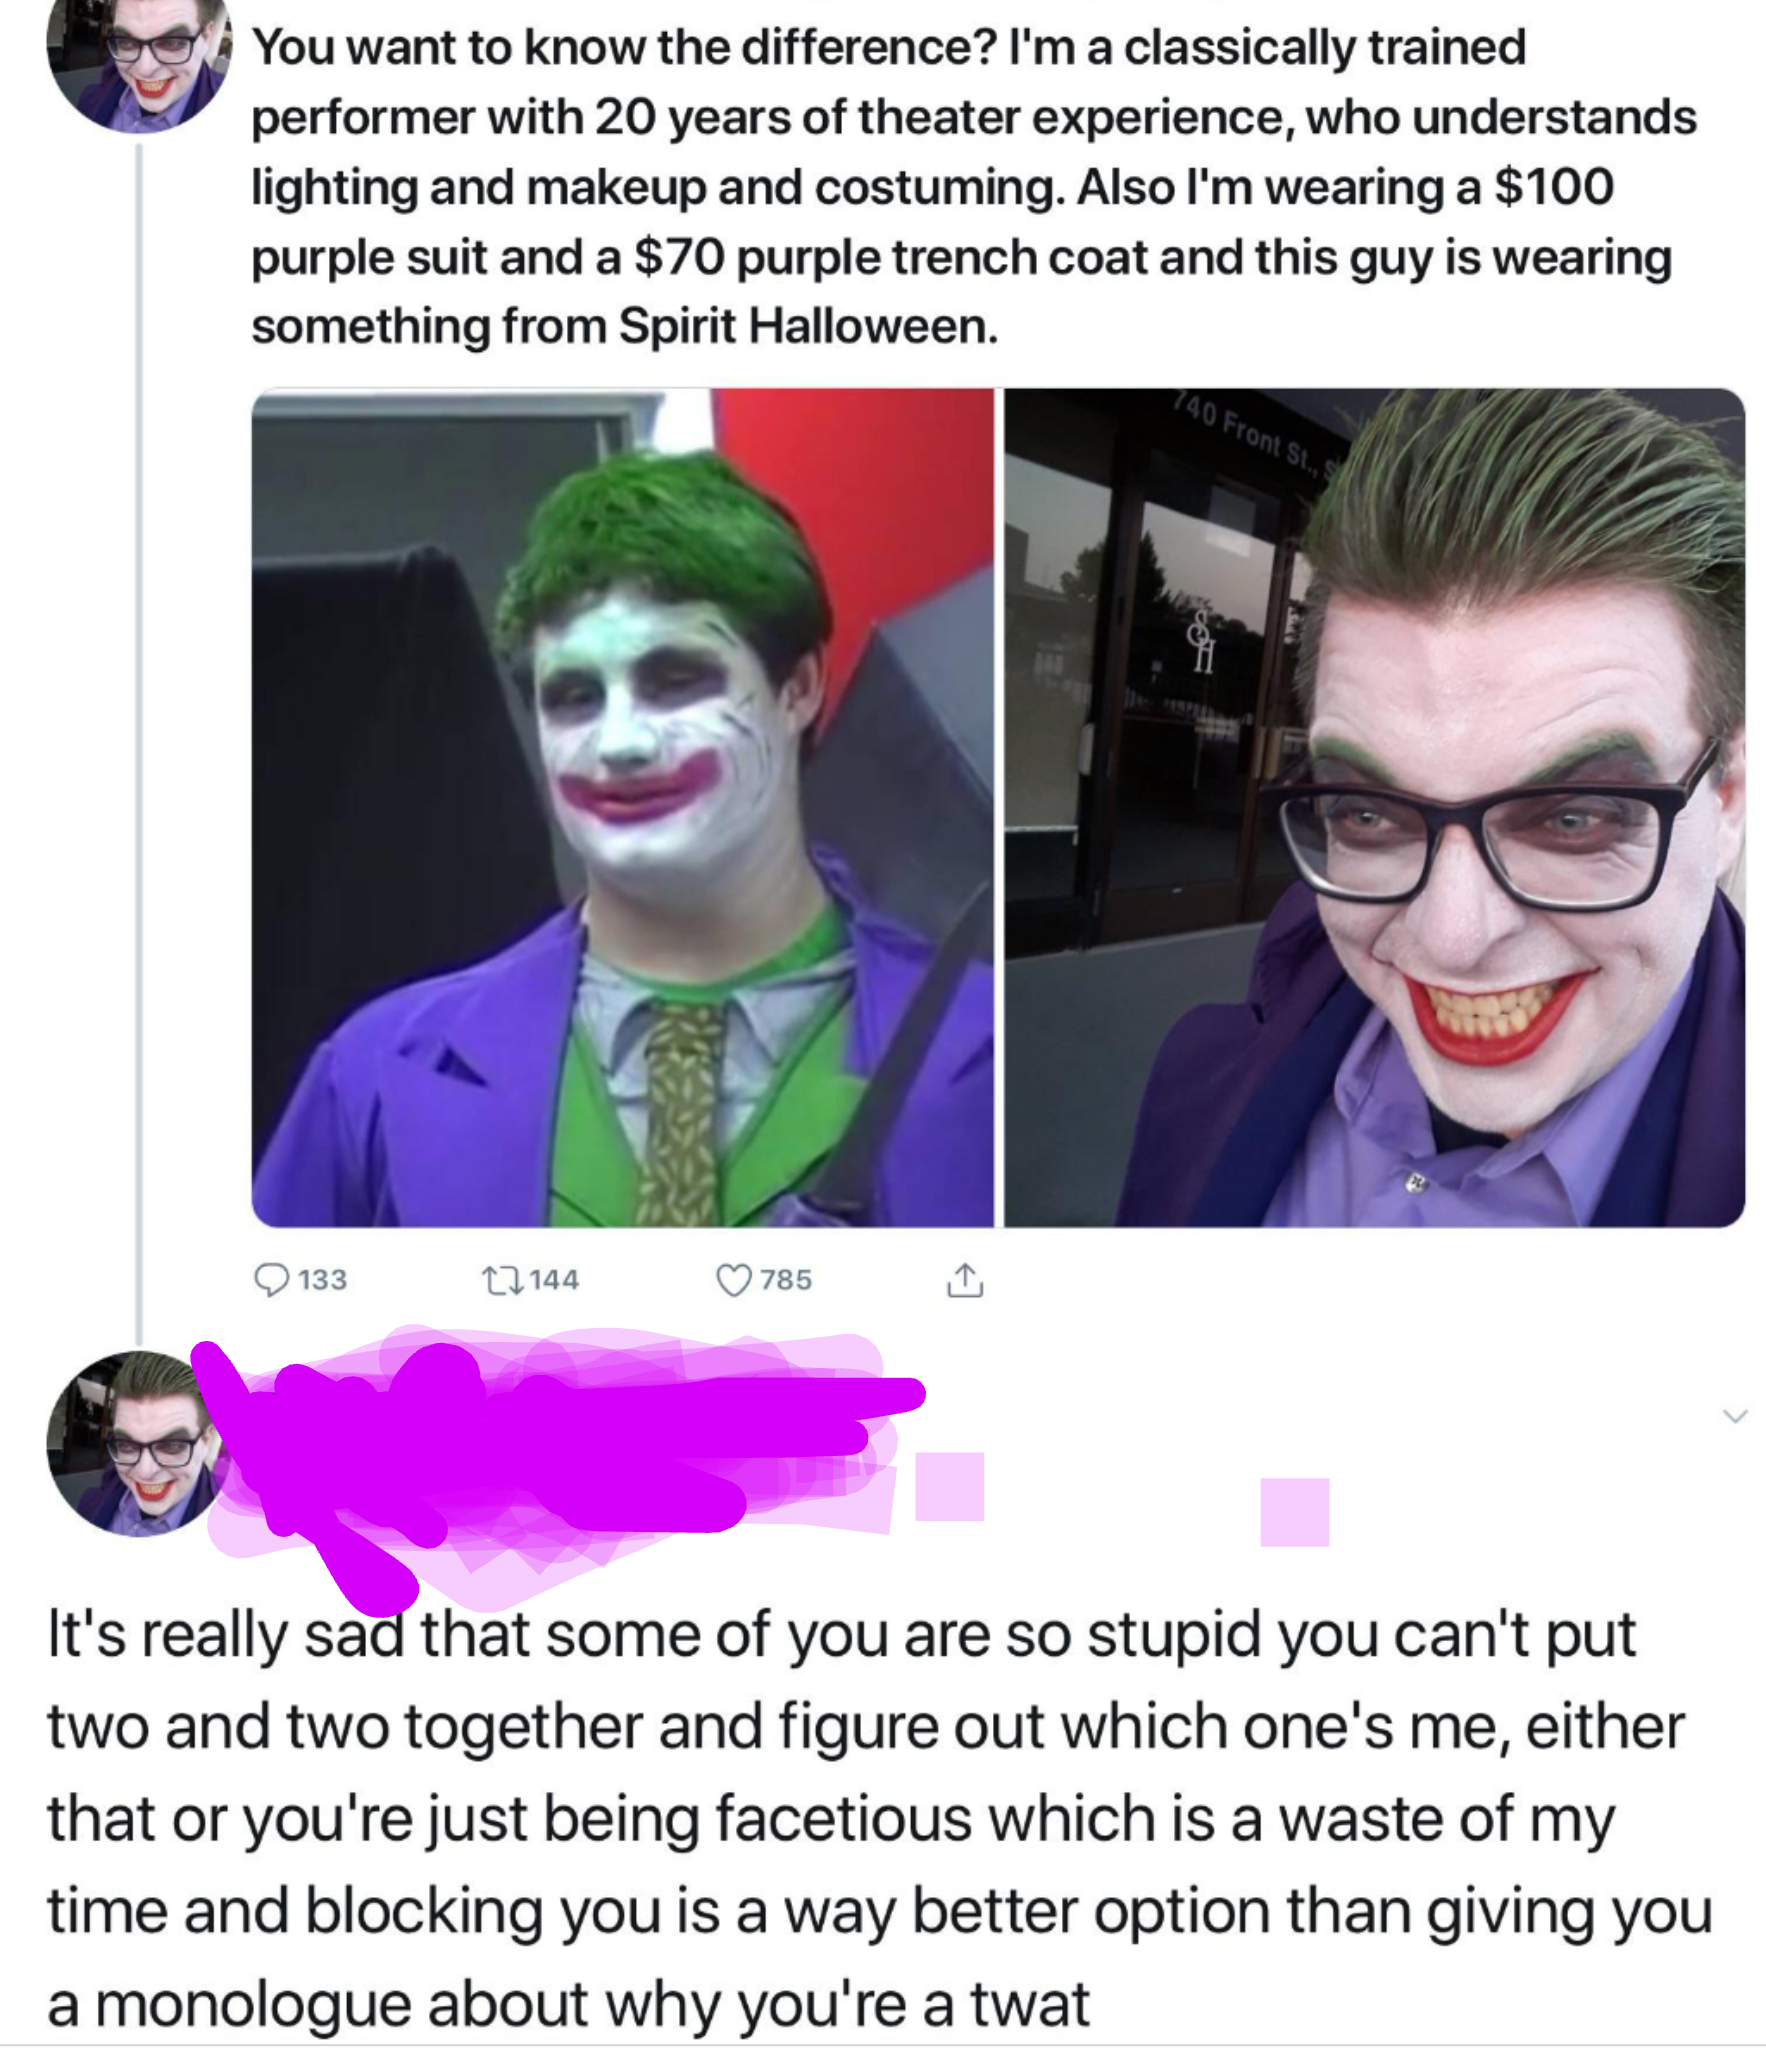 santa cruz joker - You want to know the difference? I'm a classically trained performer with 20 years of theater experience, who understands lighting and makeup and costuming. Also I'm wearing a $100 purple suit and a $70 purple trench coat and this guy i